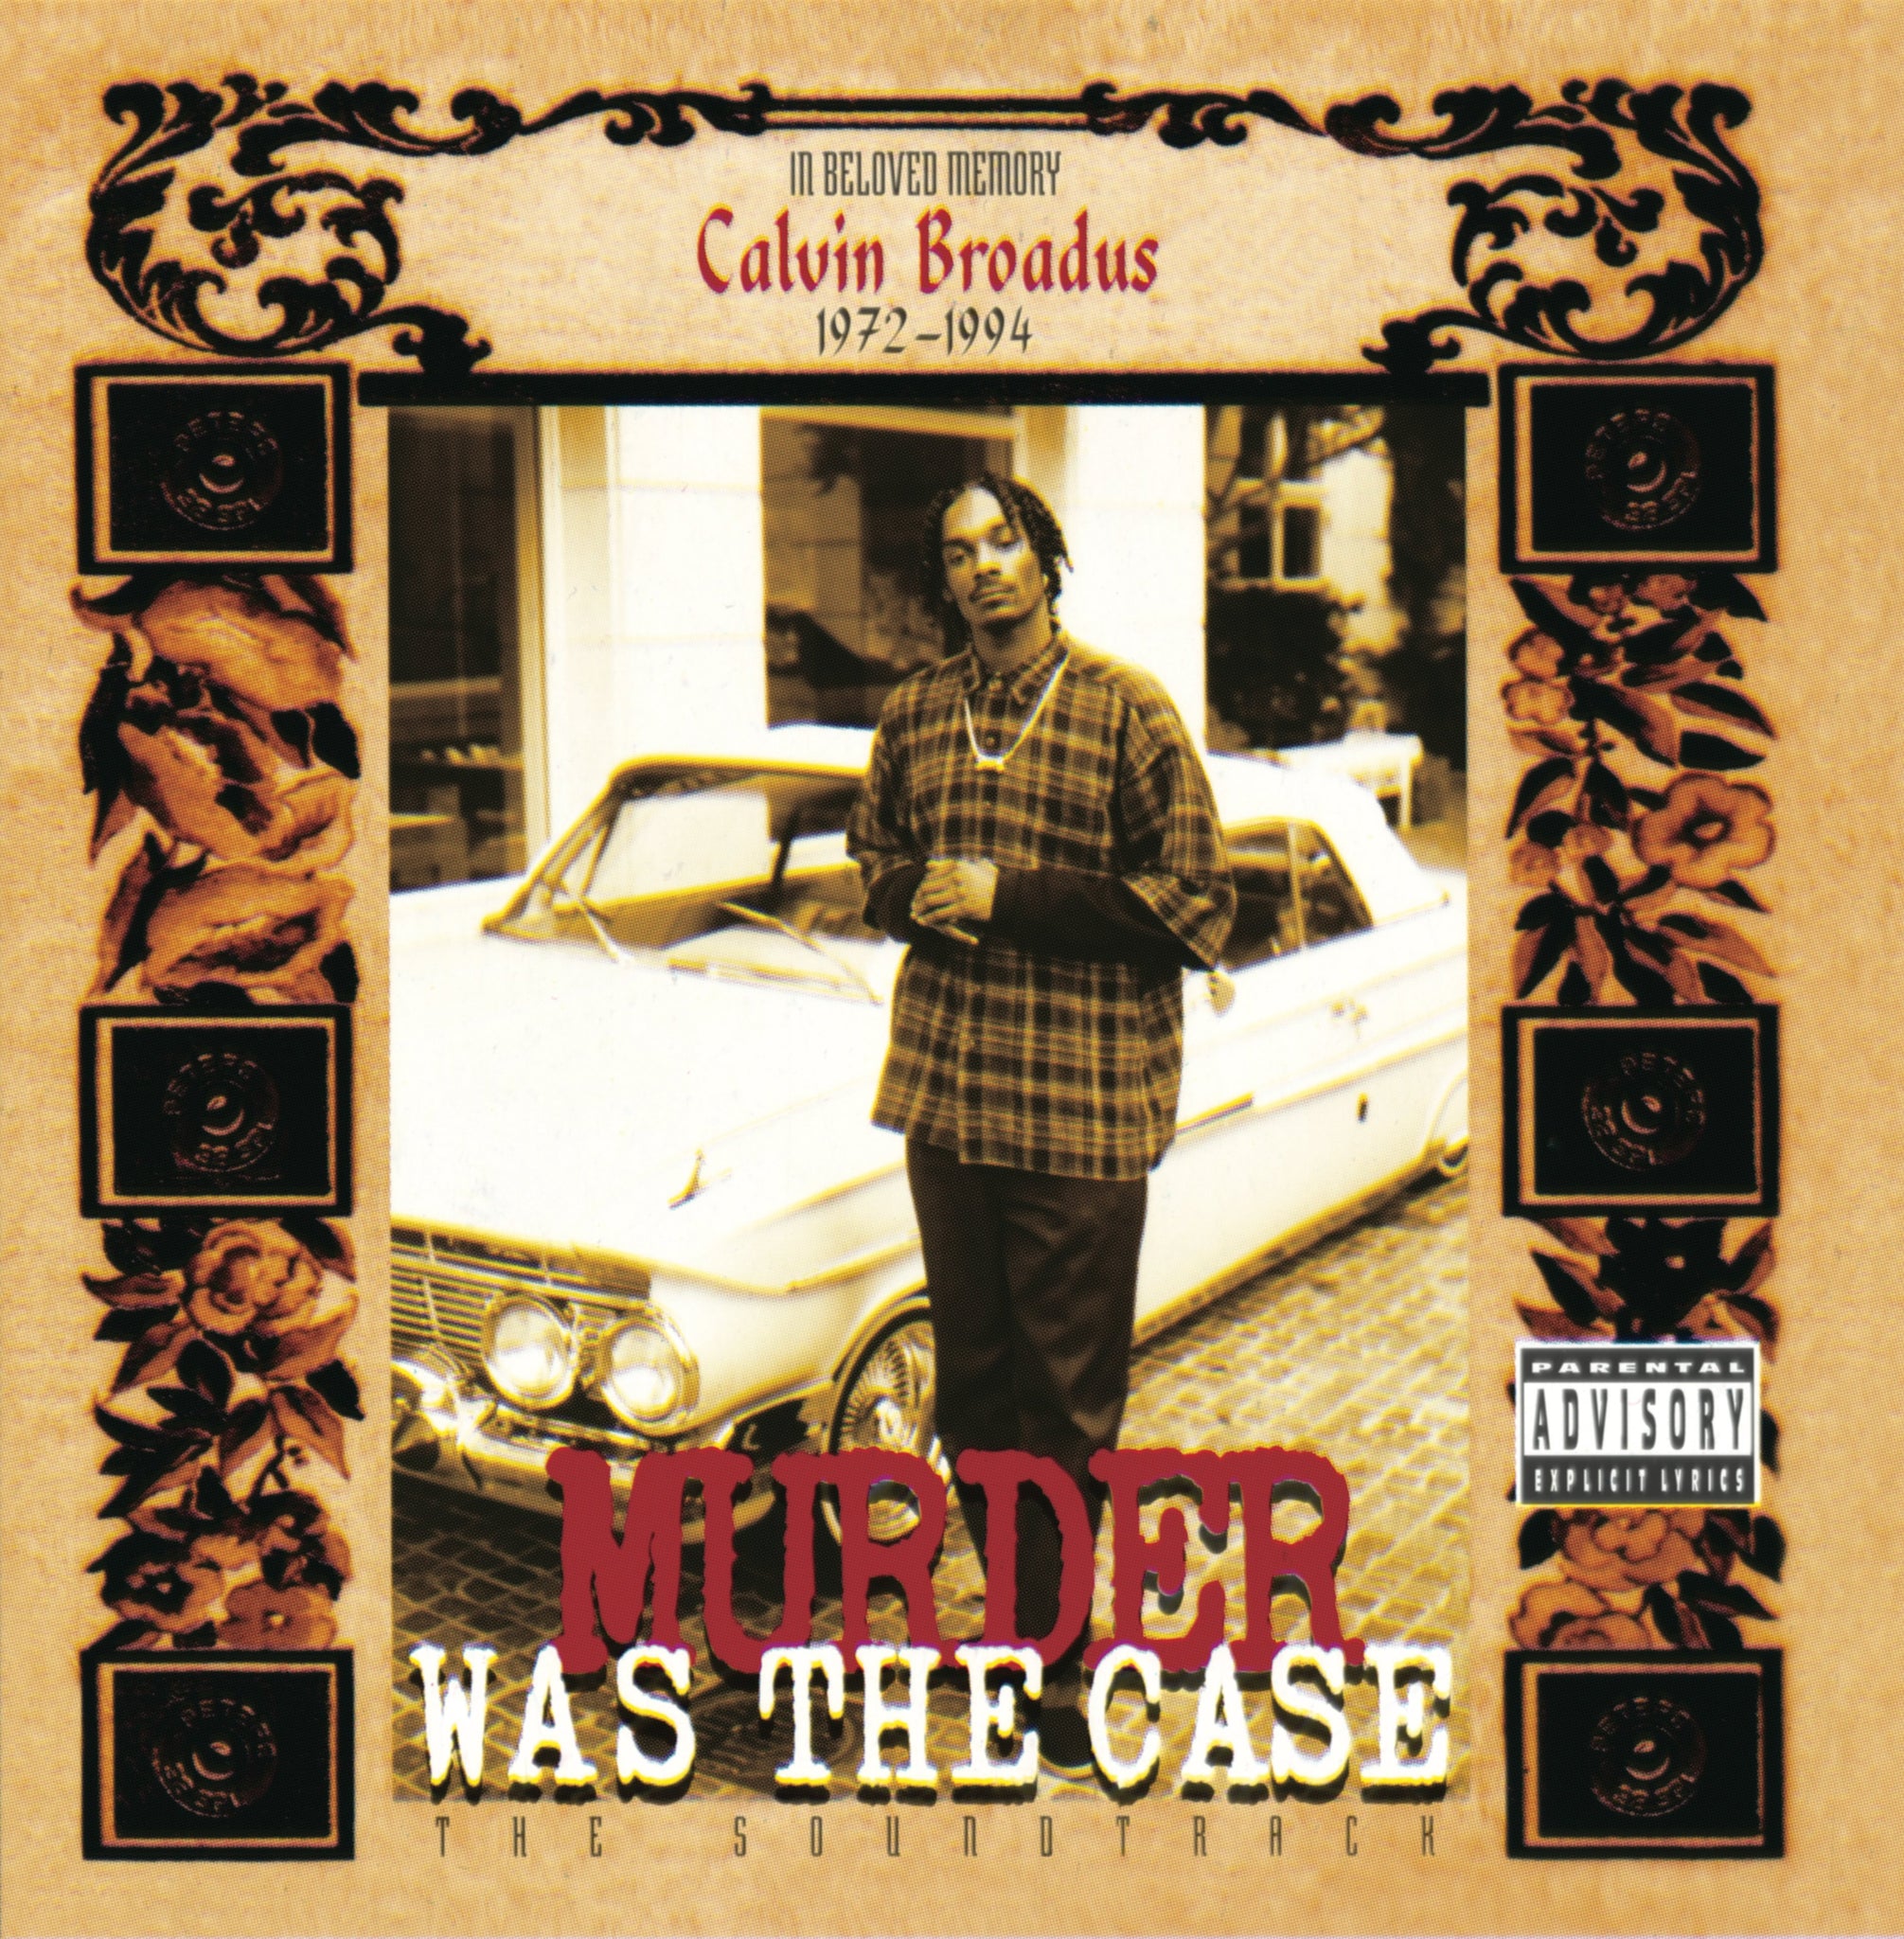 VARIOUS ARTISTS - Murder Was The Case Soundtrack 30th Anniversary - 2 LP - Translucent Red Vinyls  [RSD 2024]